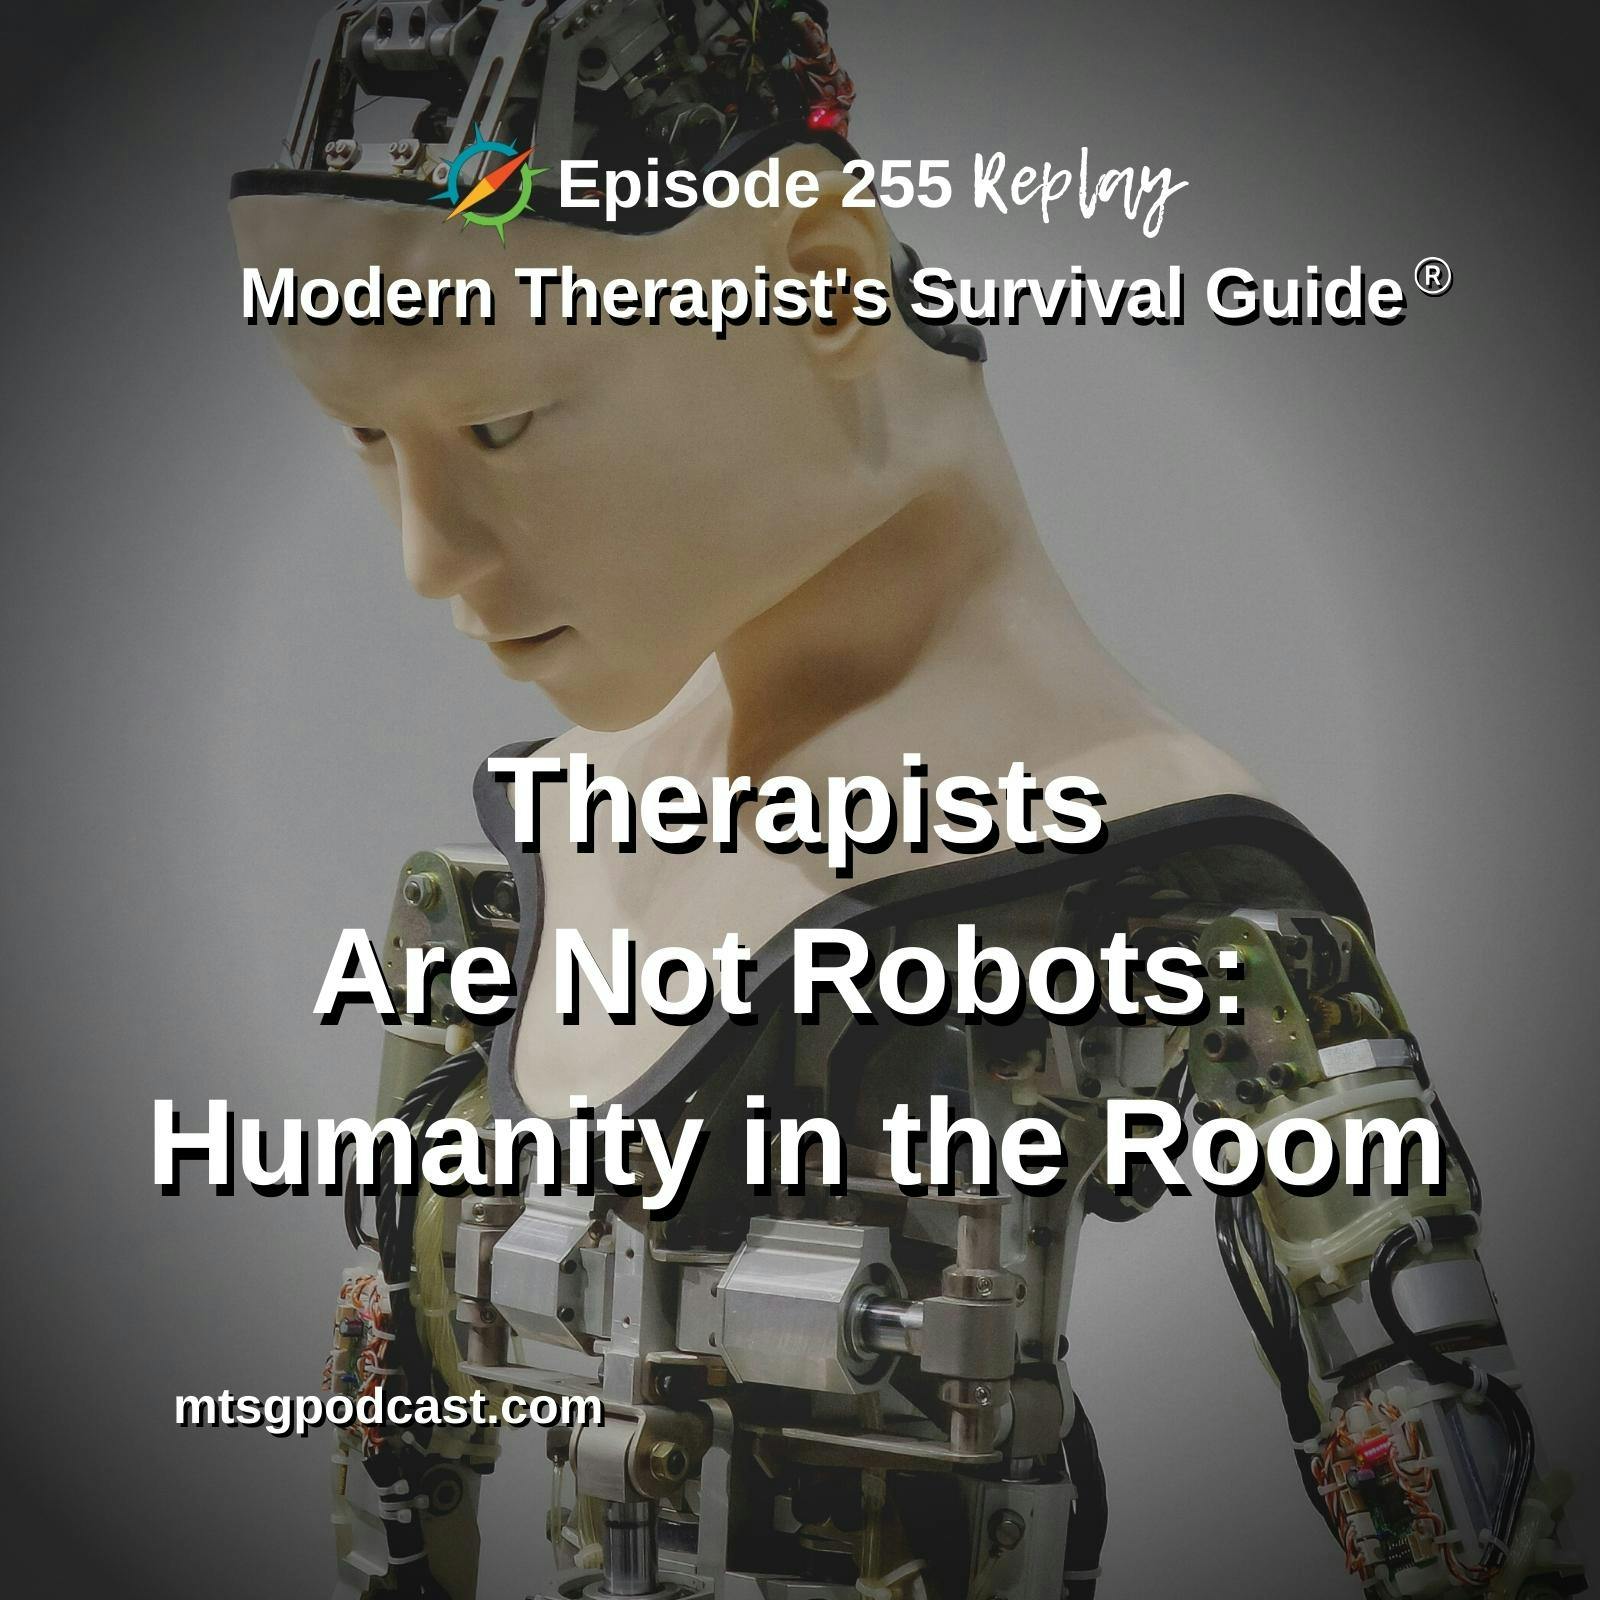 REPLAY Therapists Are Not Robots: How We Can Show Humanity in the Room